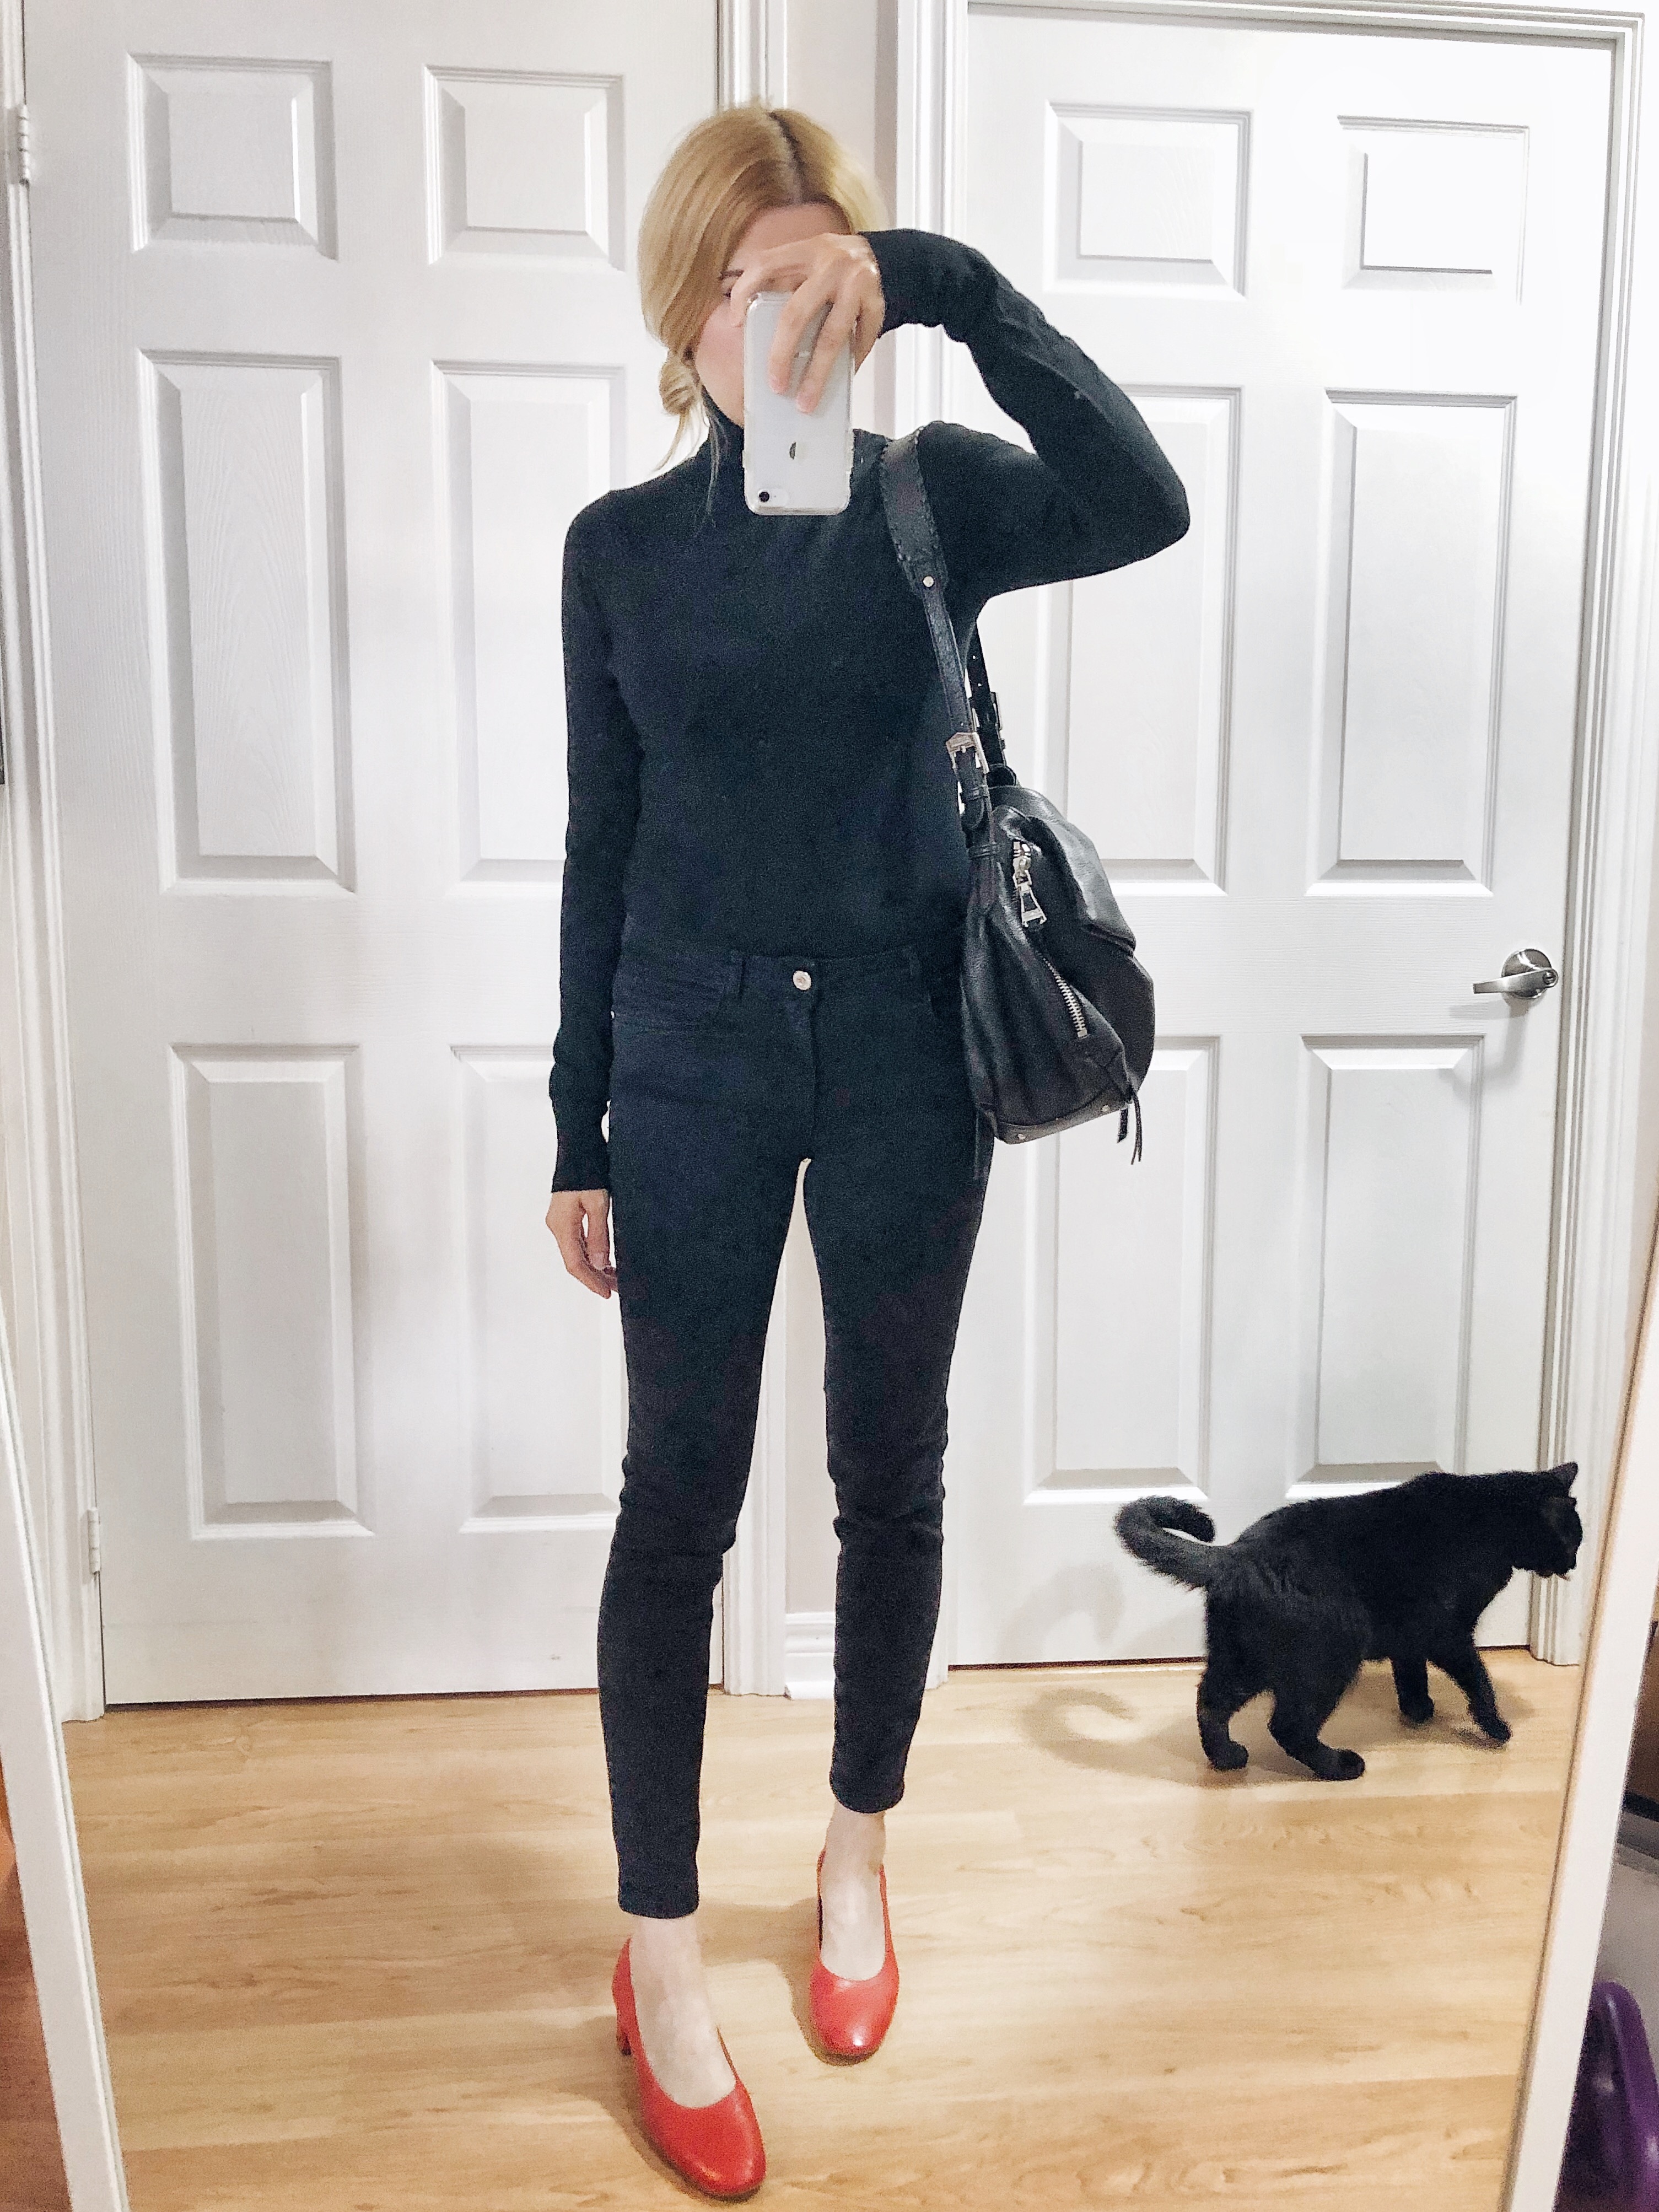 What I wore. A black turtleneck, black skinny jeans, and Red Everlane Day Heels.